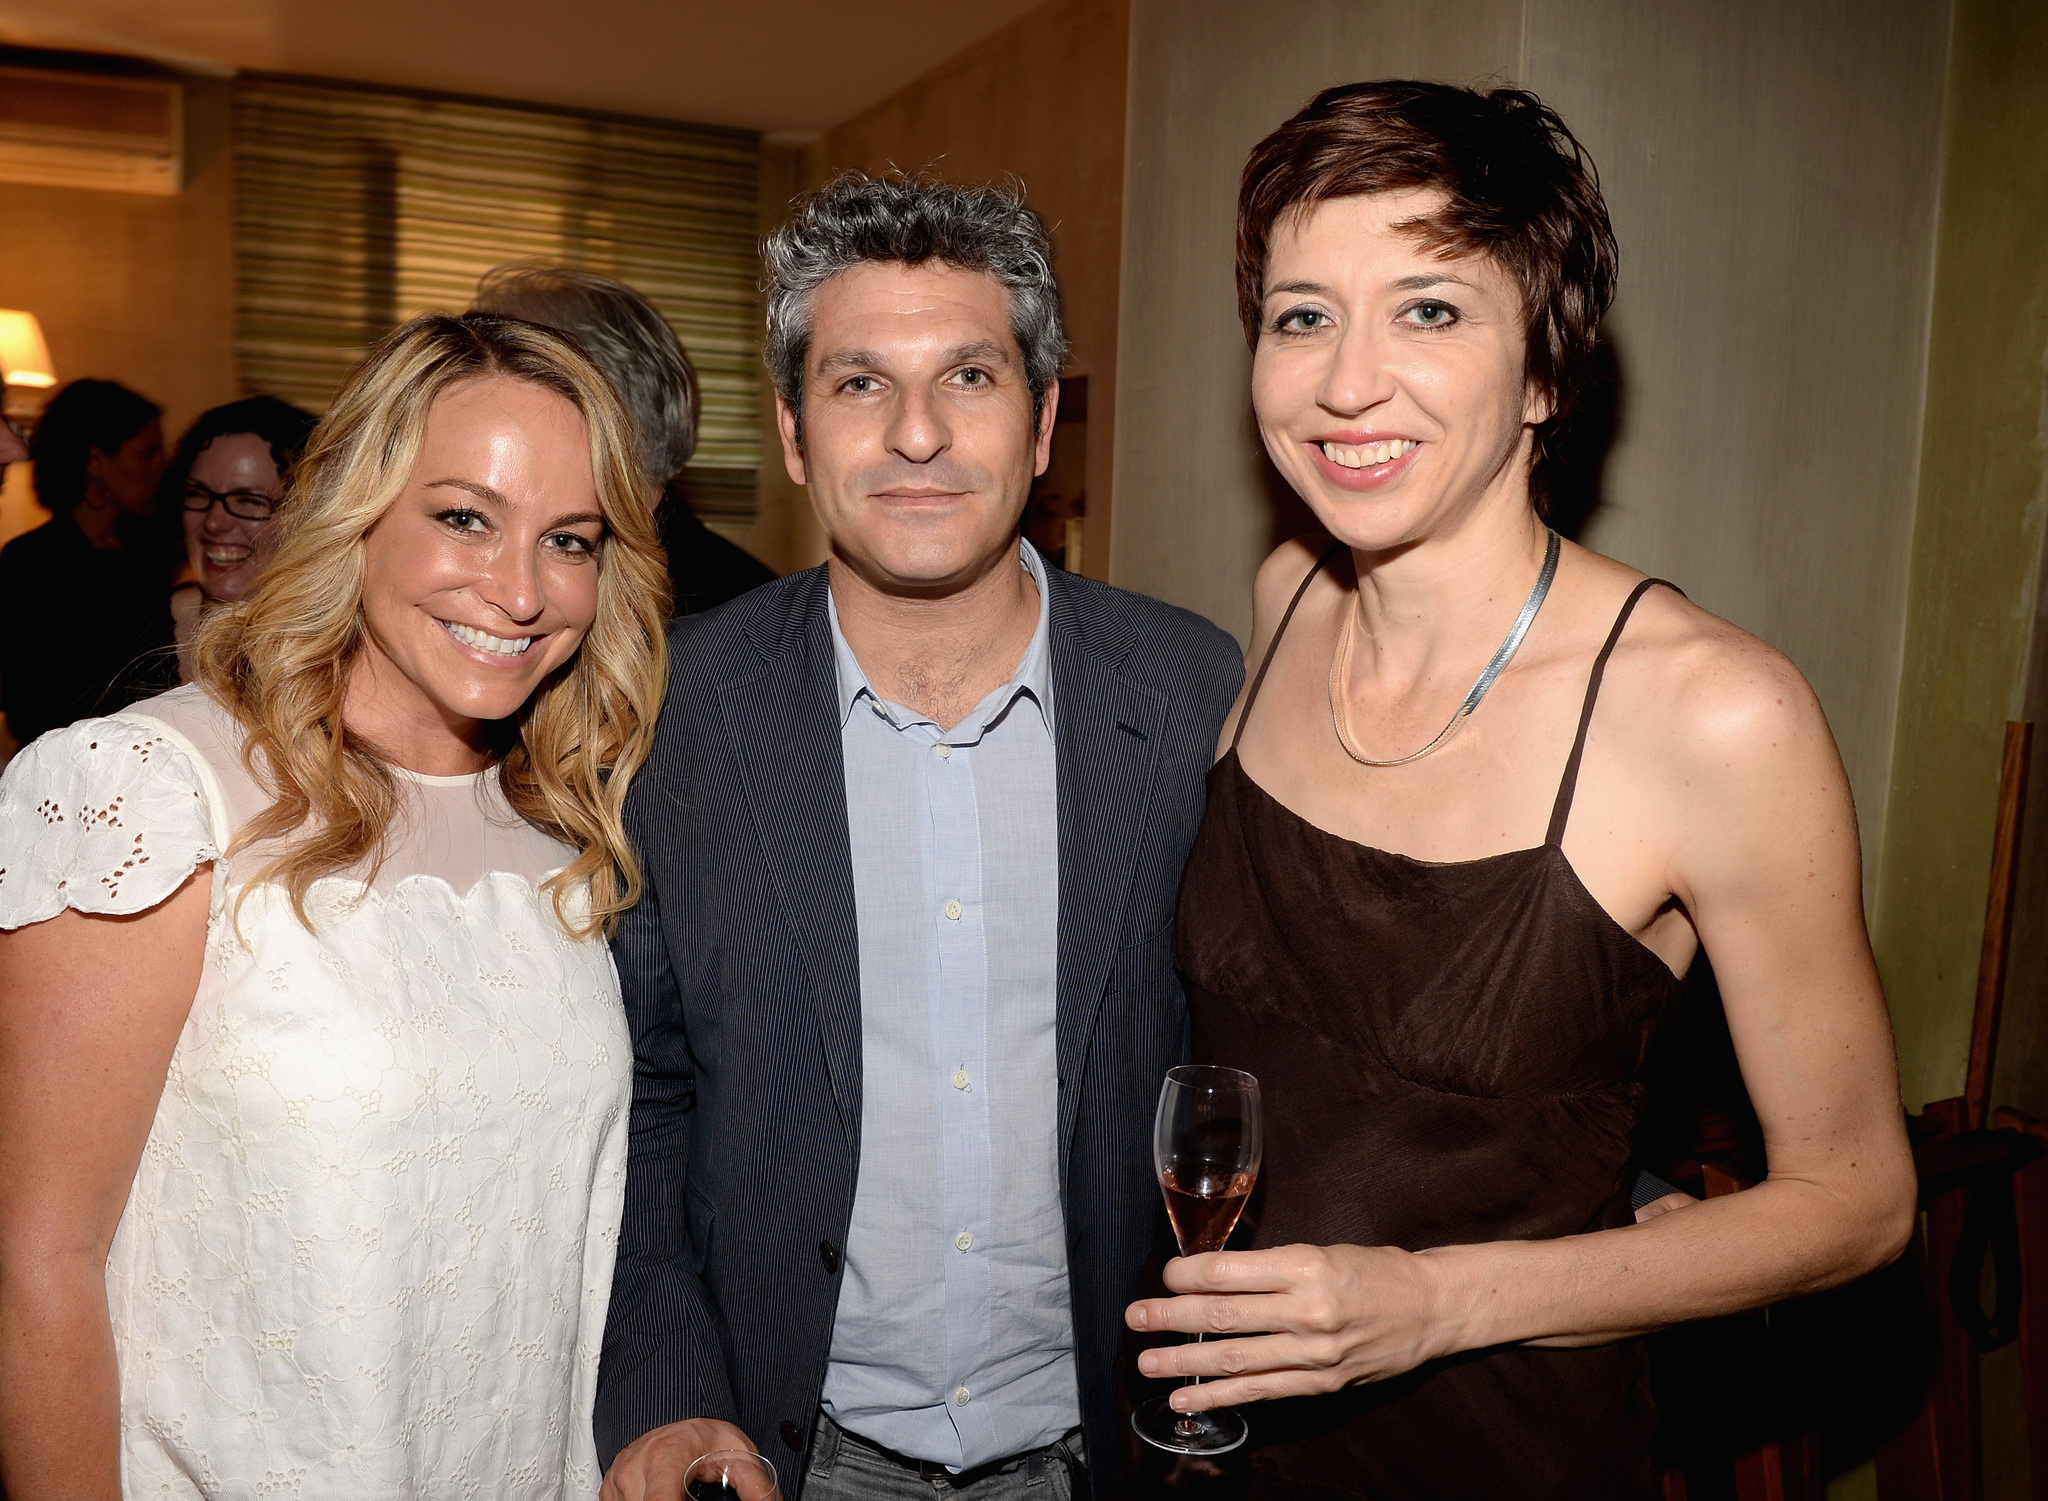 IMDb's Emily Glassman, London Film Critics' Circle Chairman Jason Solomans and indieWIRE's Dana Harris attend the IMDB's 2013 Cannes Film Festival Dinner Party during the 66th Annual Cannes Film Festival at Restaurant Mantel on May 20, 2013 in Cannes, France.